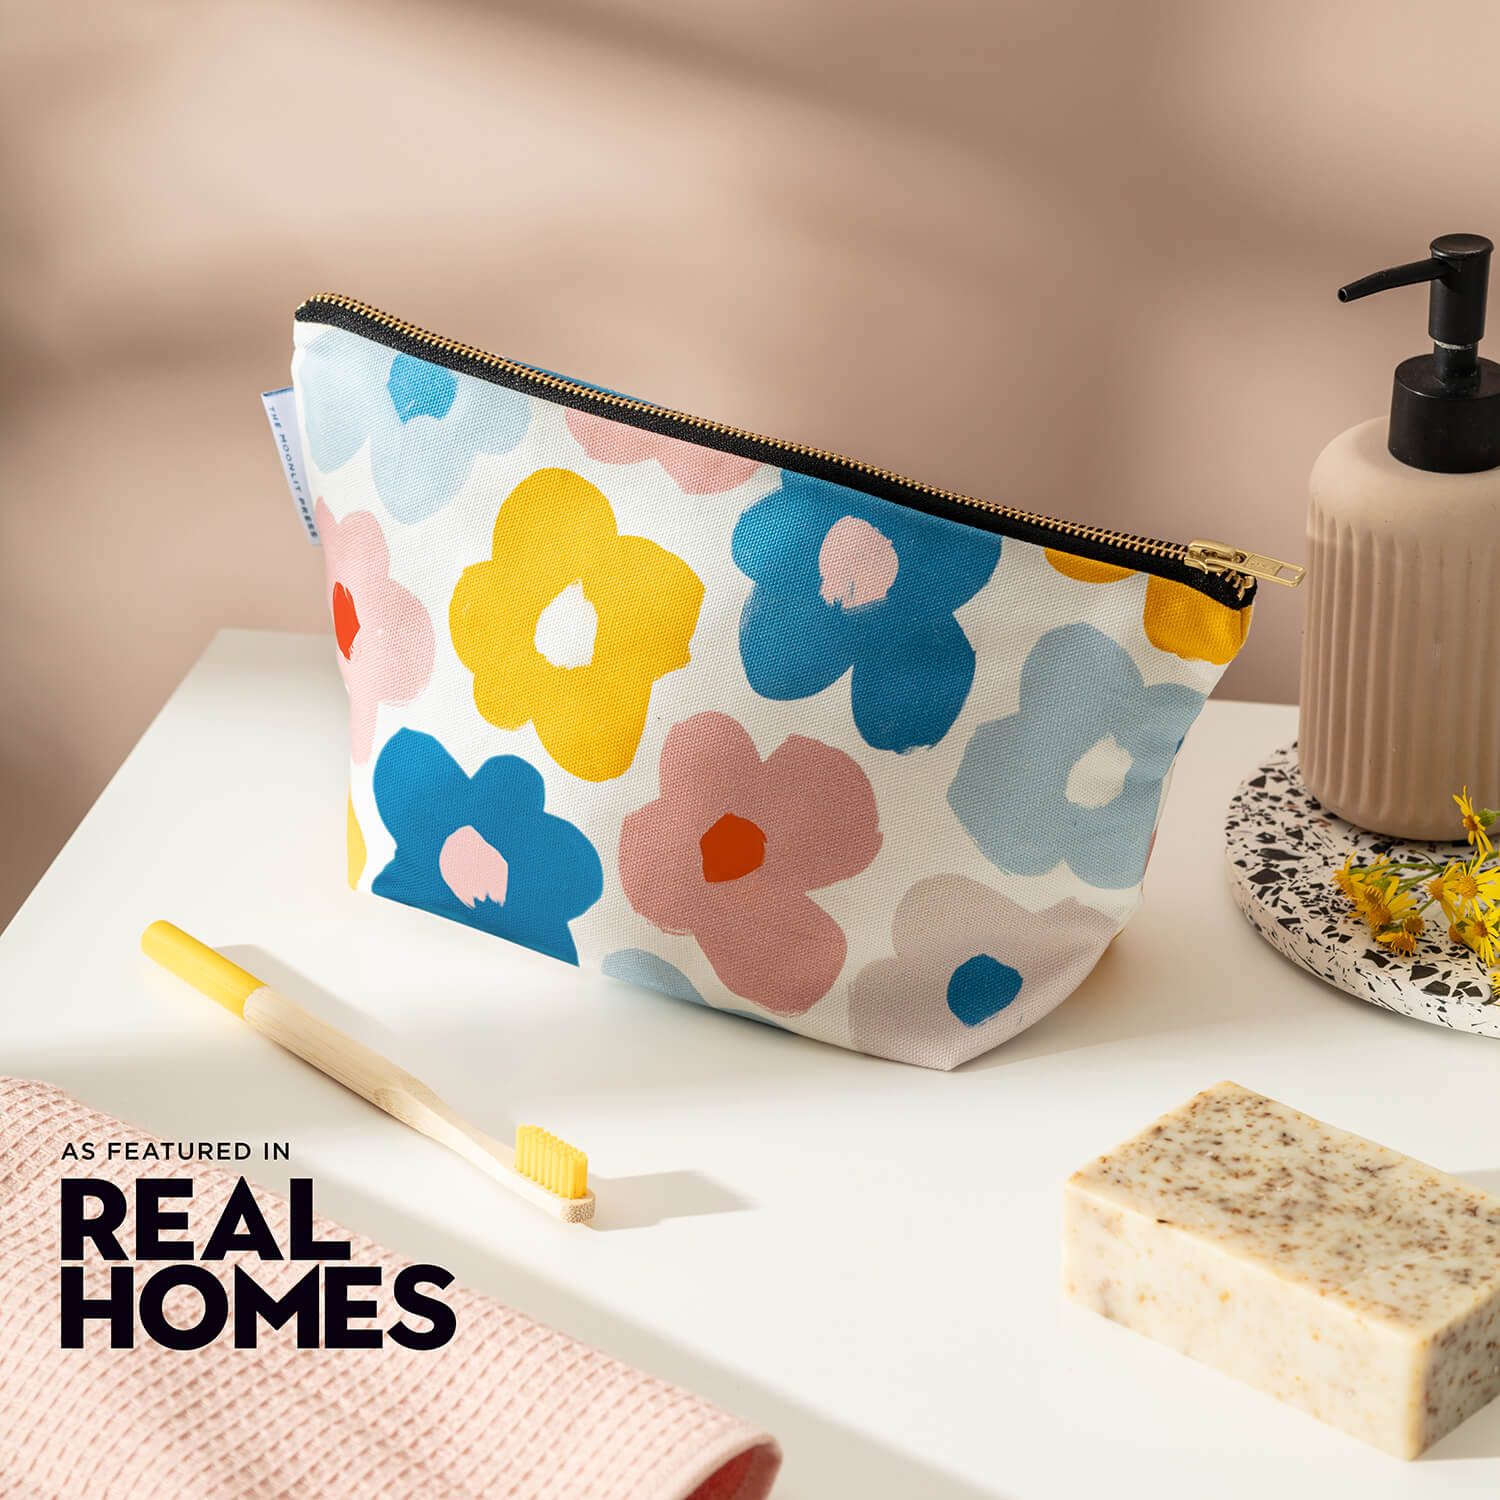 Floral Wash Bag featured in Real Homes Magazine - The Moonlit Press